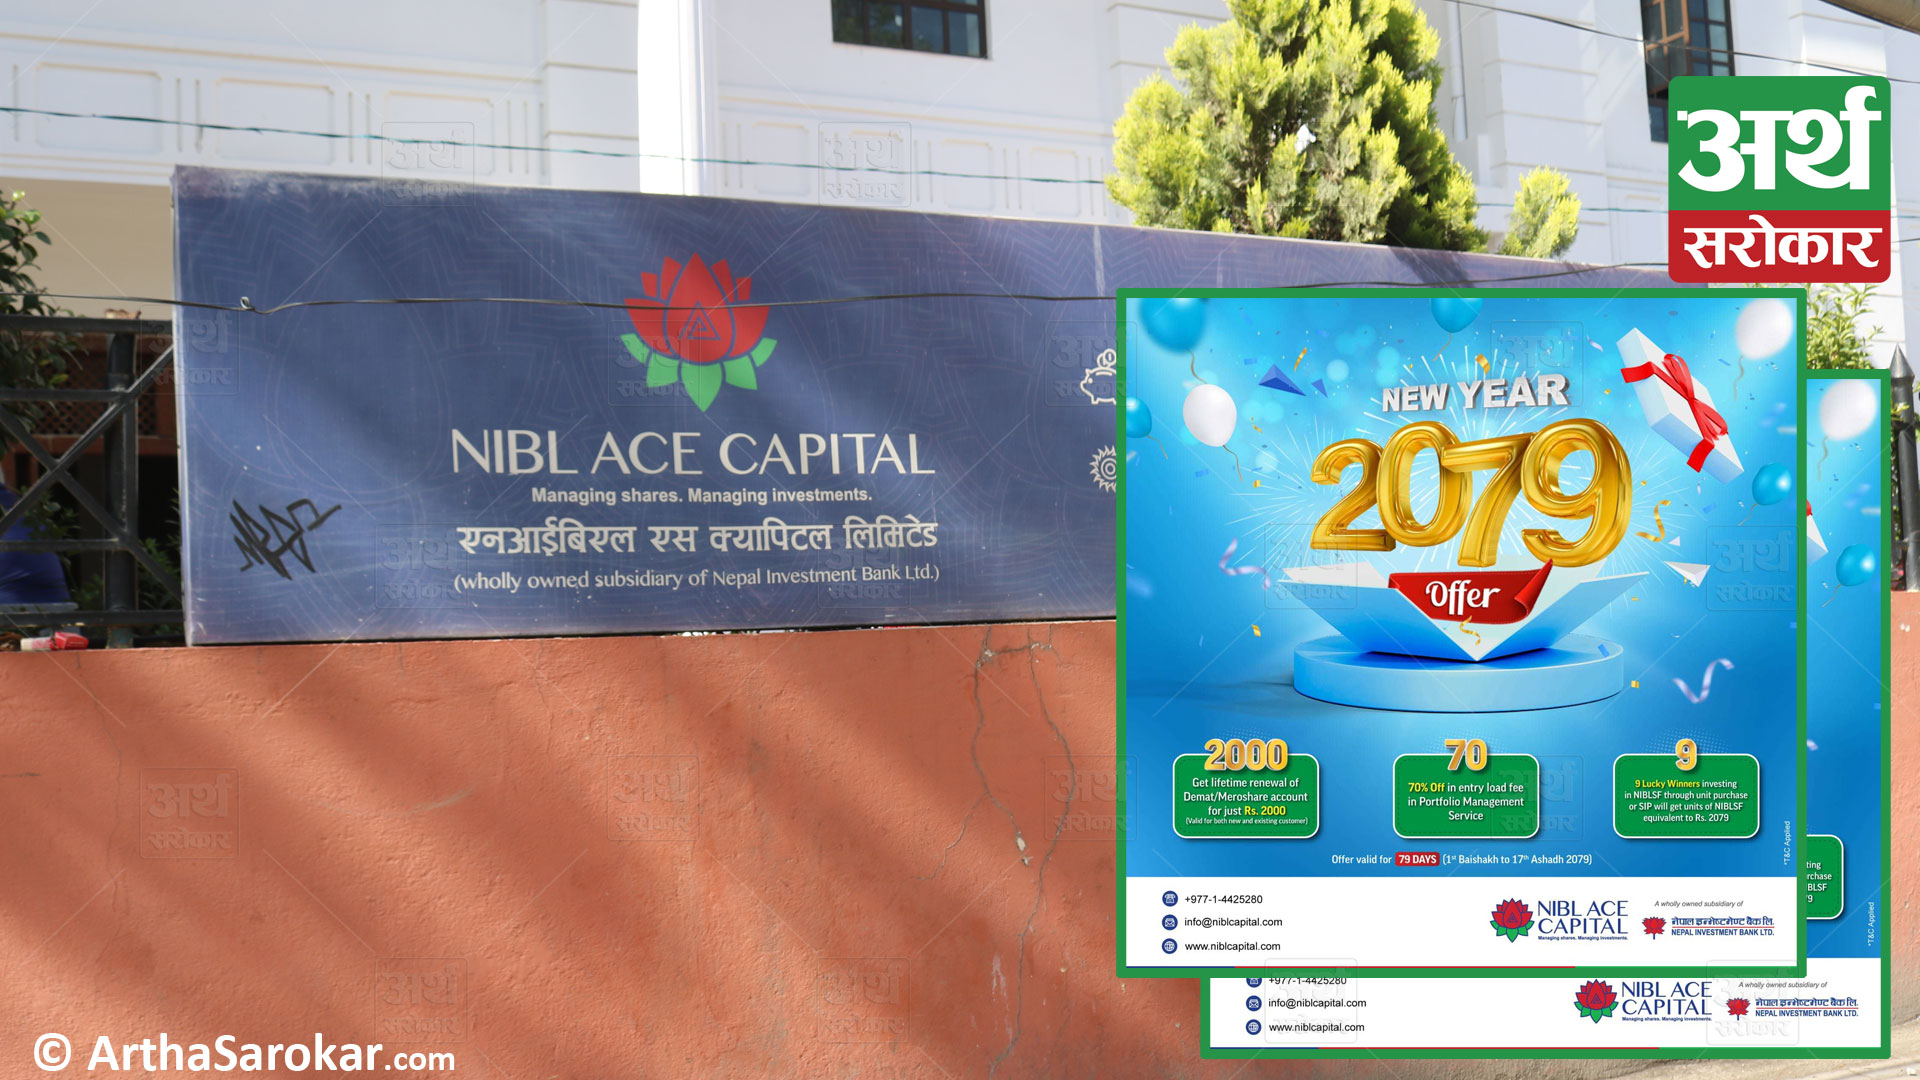 NIBL Ace Capital brought various attractive offers